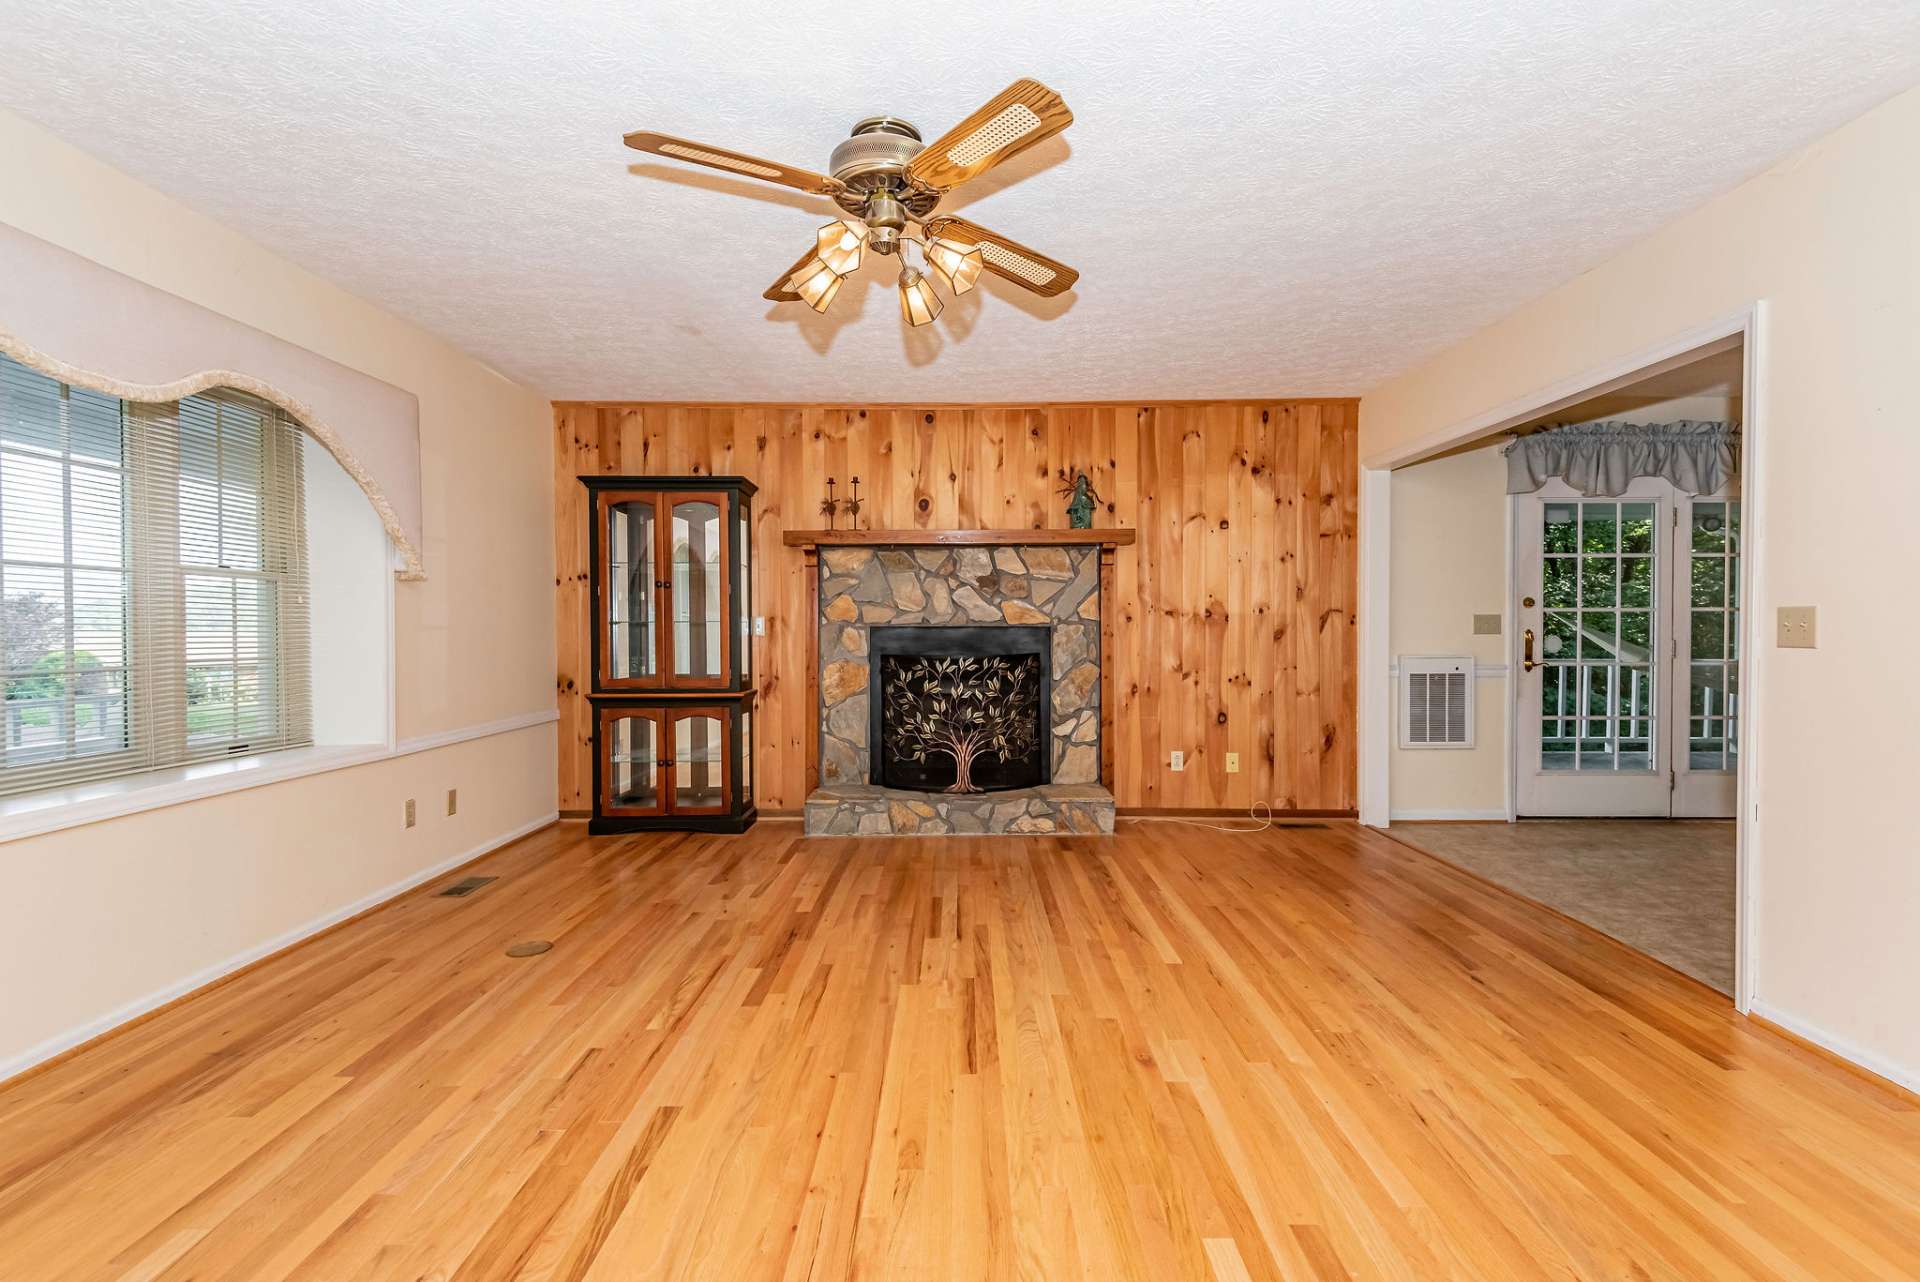 The main level offers a spacious  living area with wood floors and plenty of natural light.